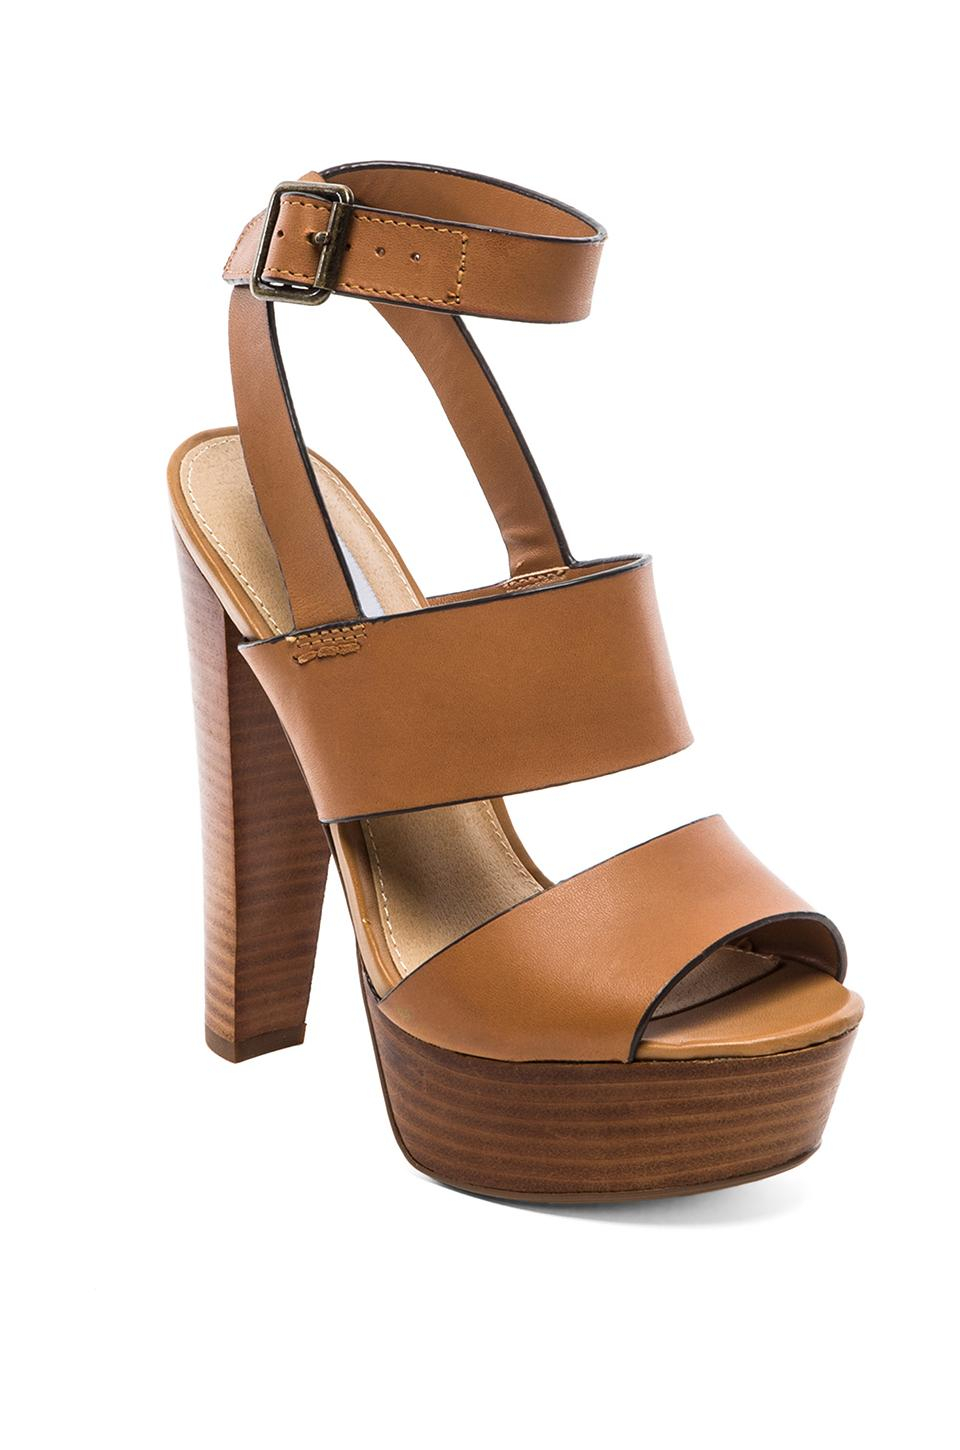 the finest leather, these stylish Dezzy sandal heels from Steve Madden ...